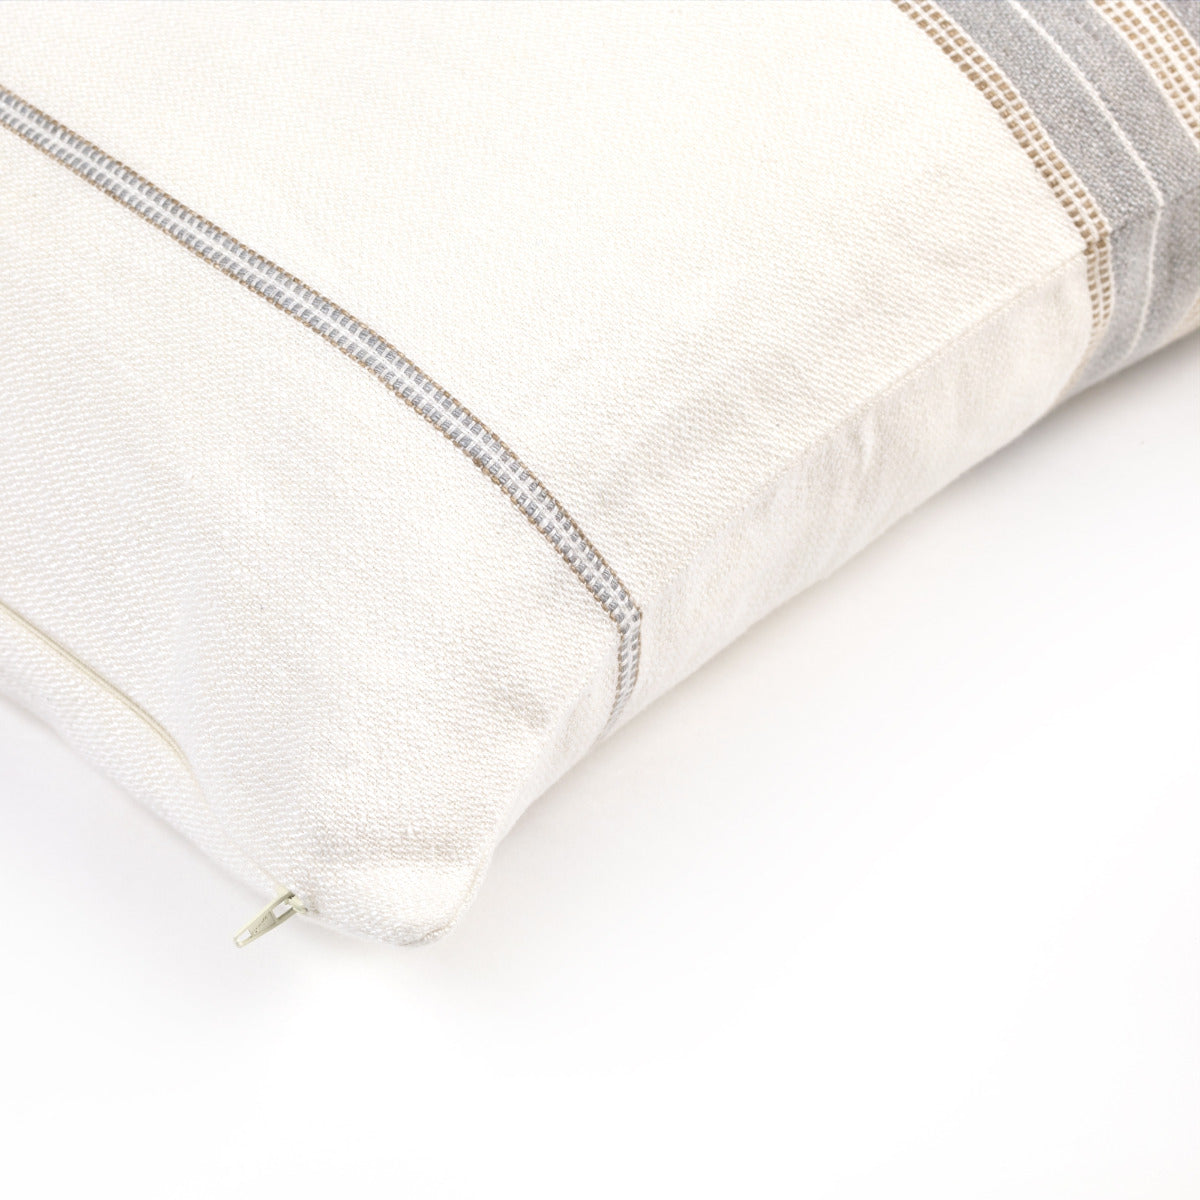 propriano linen pillow cover by libeco on adorn.house